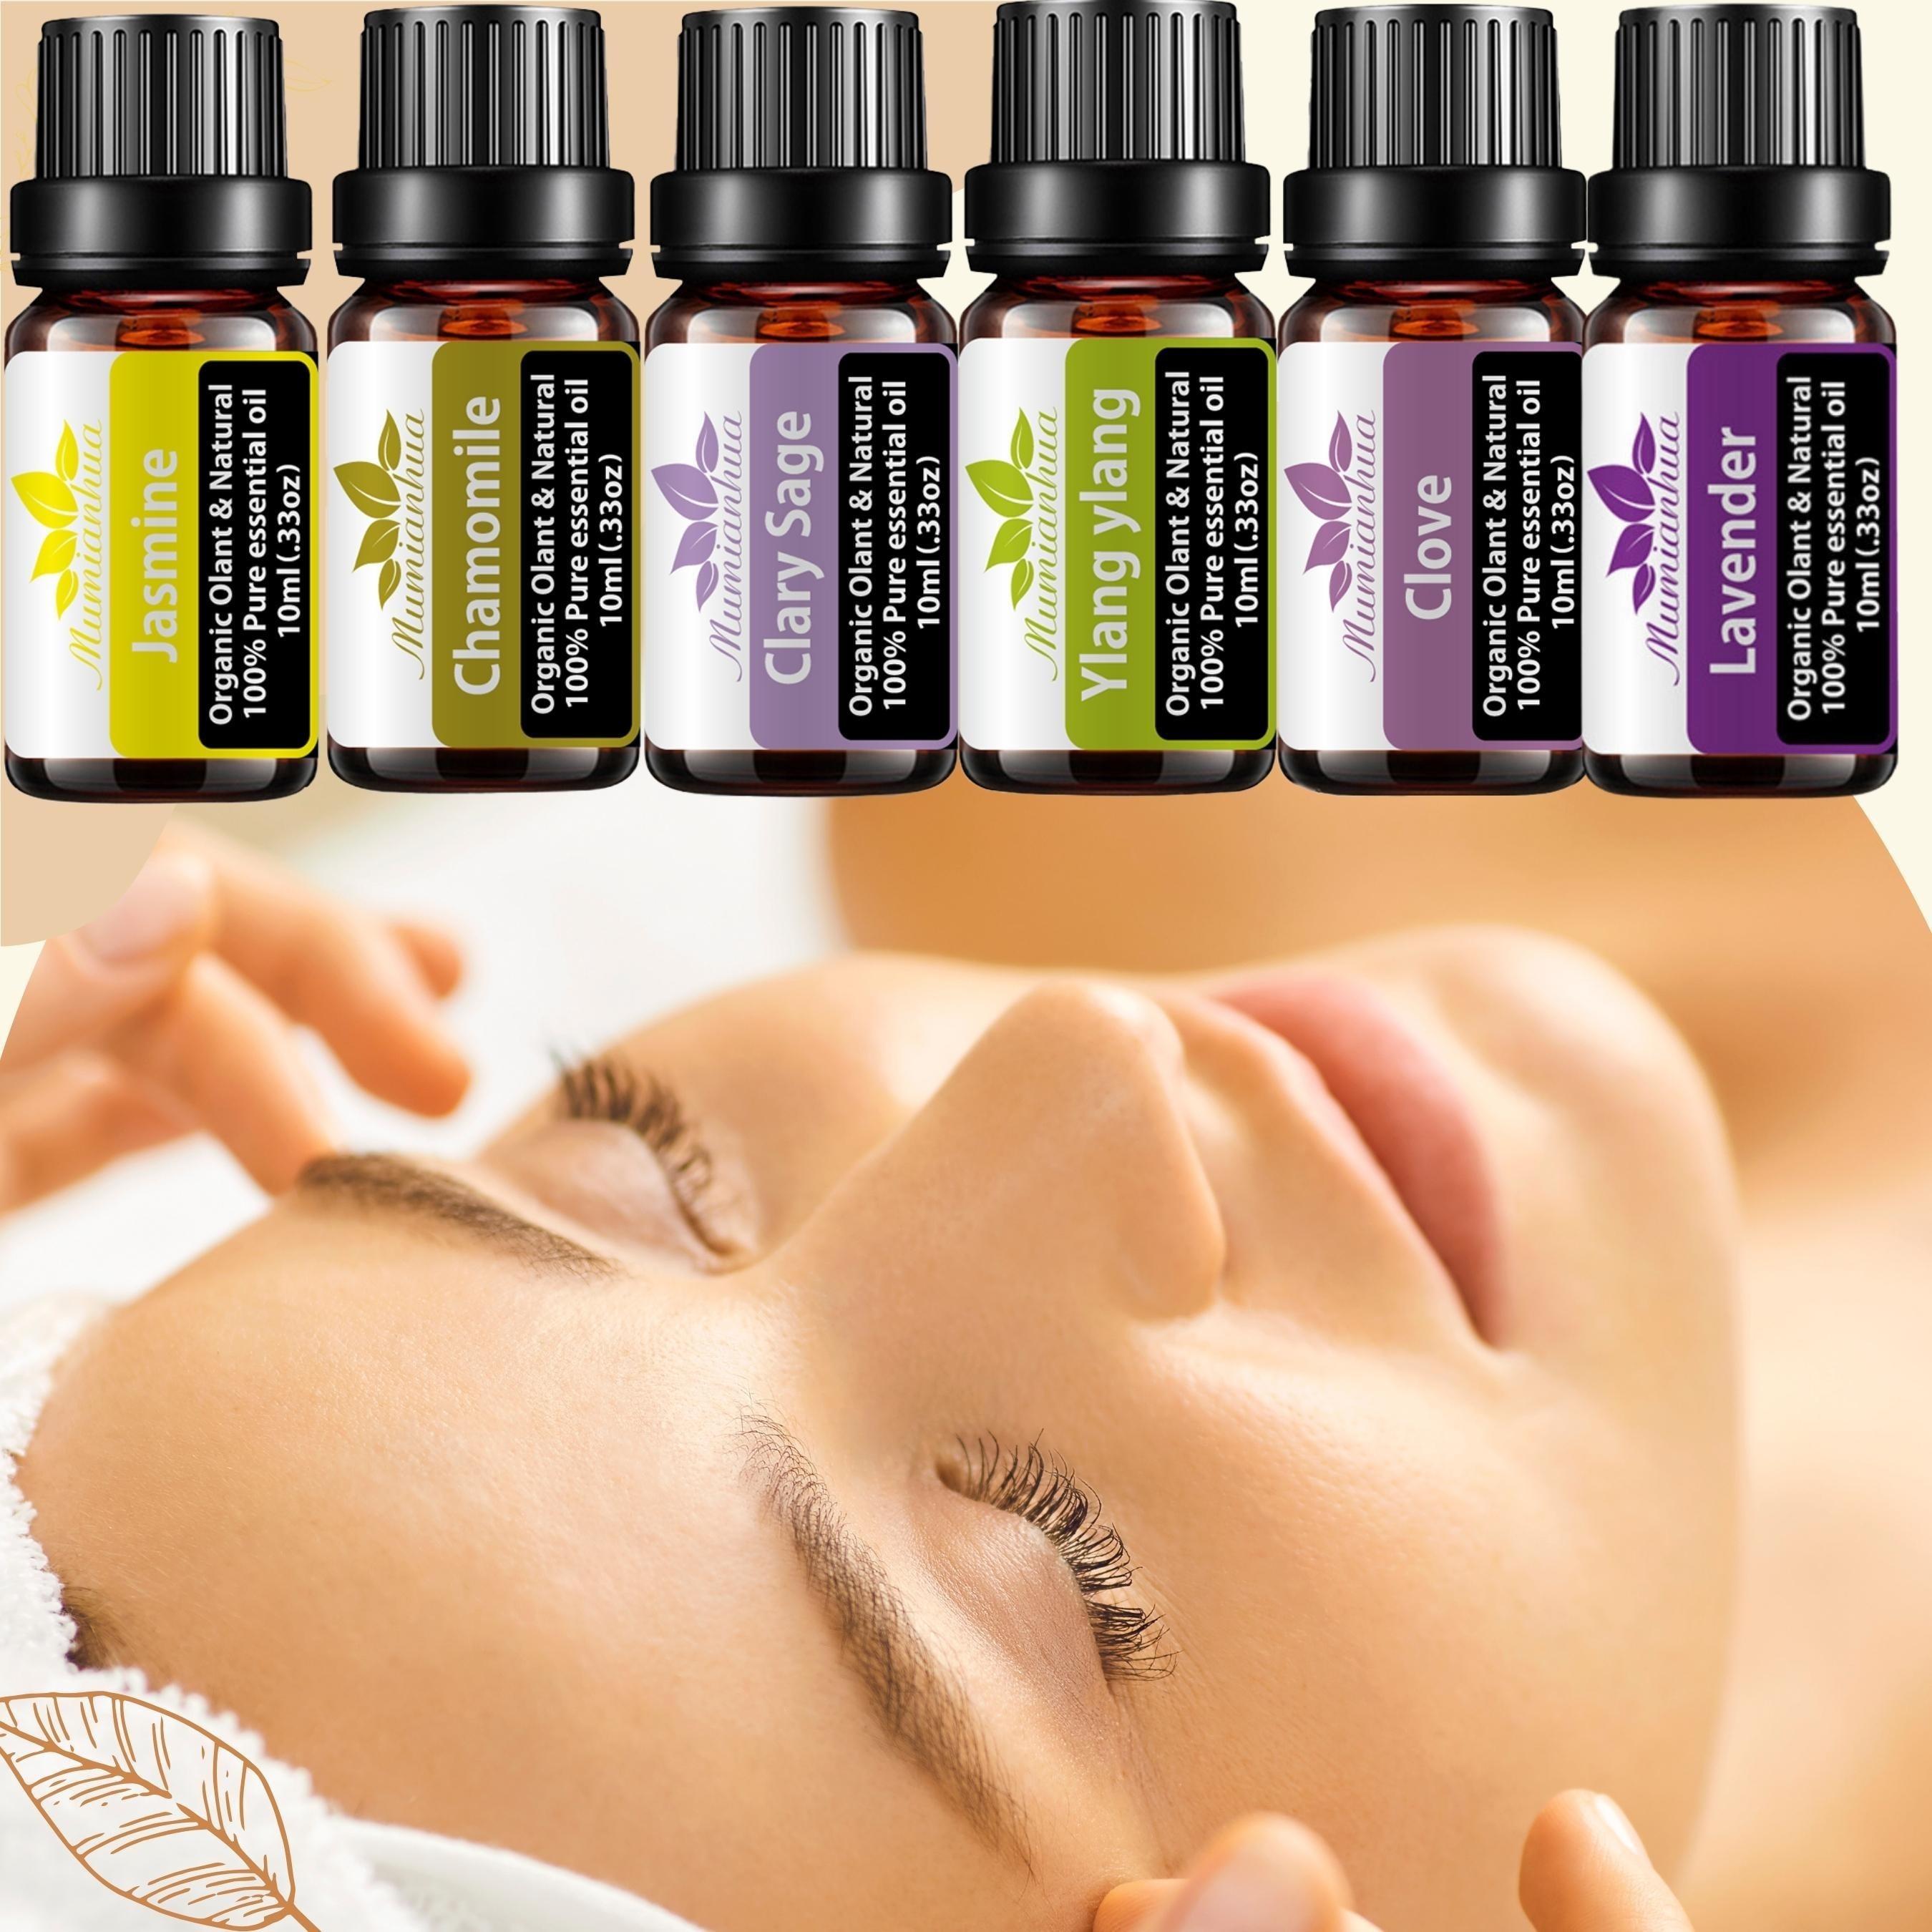 Floral Essential Oils Set - Fragrance Oil for Diffusers, Candle Making -  Lavender, Geranium, Rose, Jasmine, Gardenia, ylang-ylang Aromatherapy Oils